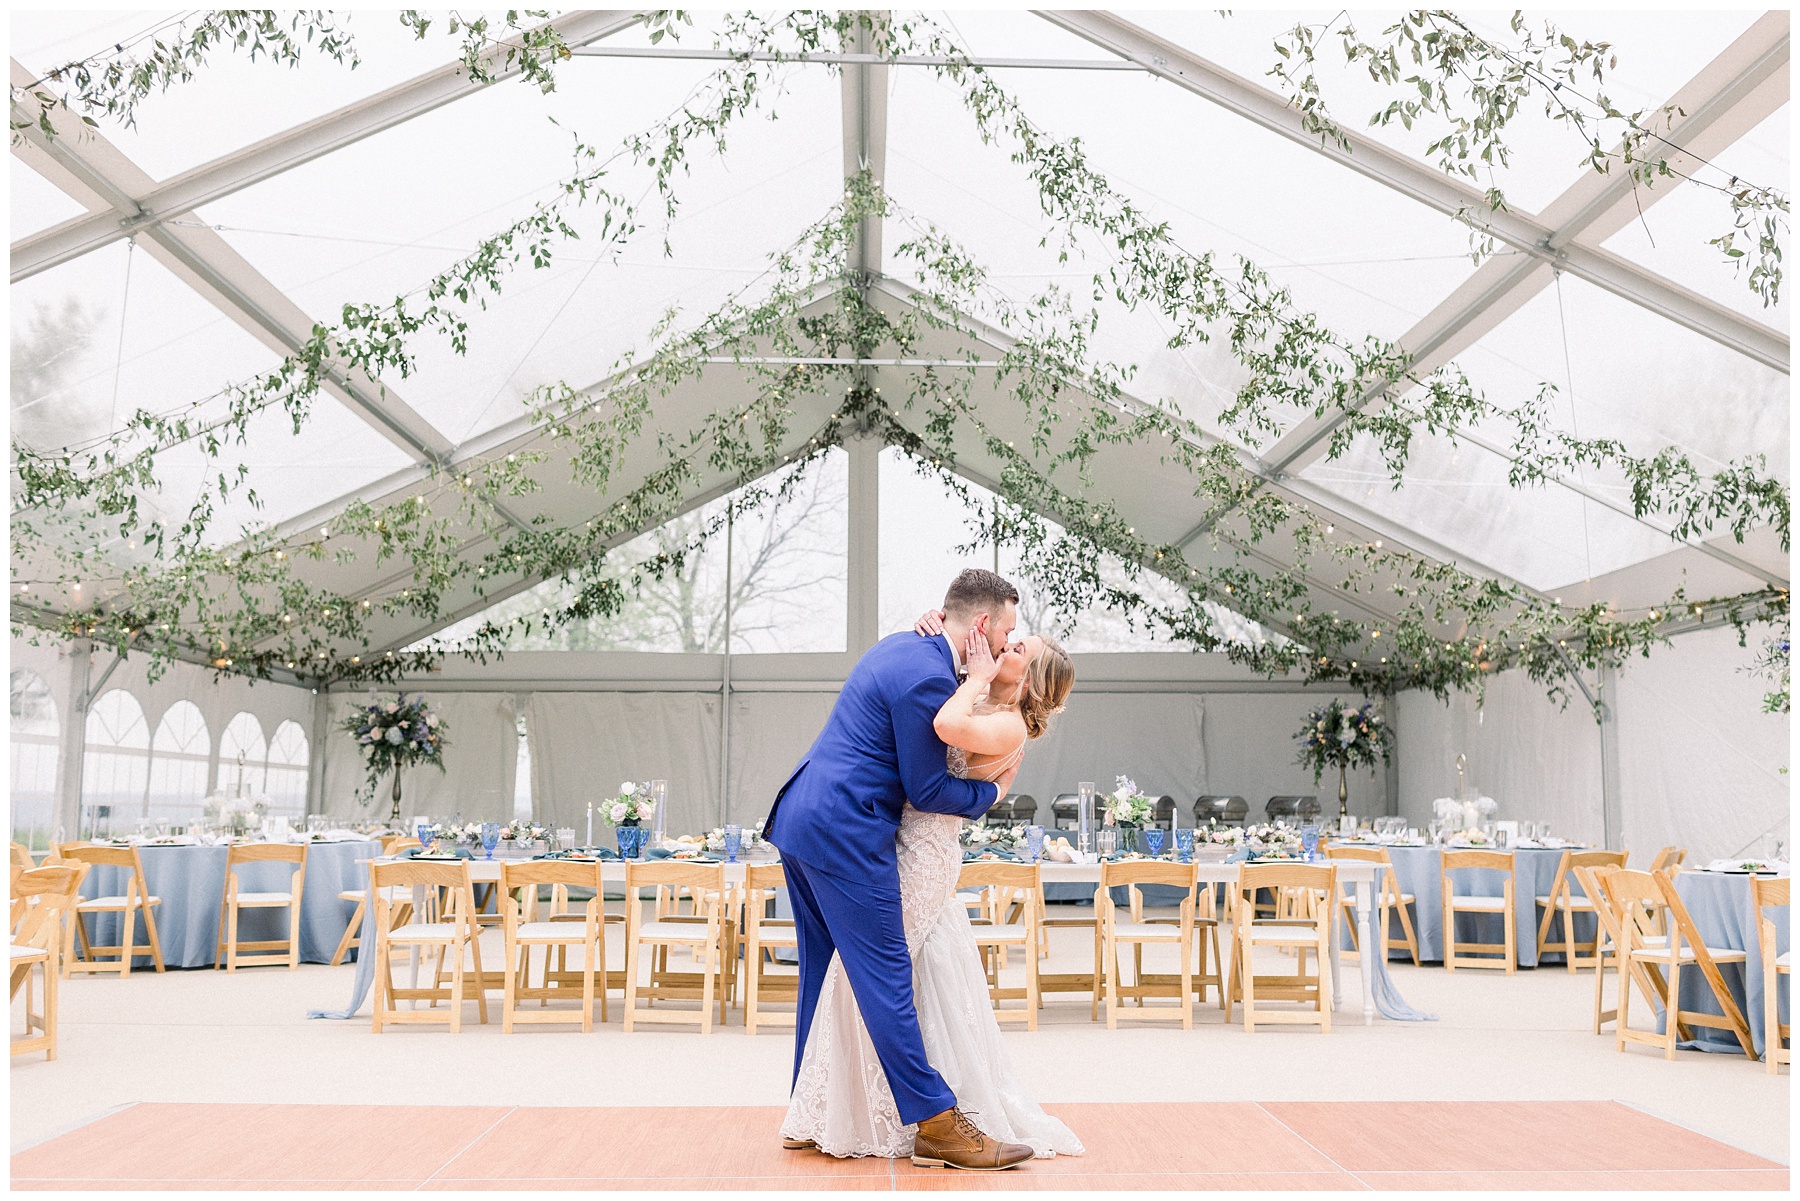 bride and groom at clear tented wedding reception at Phillipsburg, New Jersey wedding